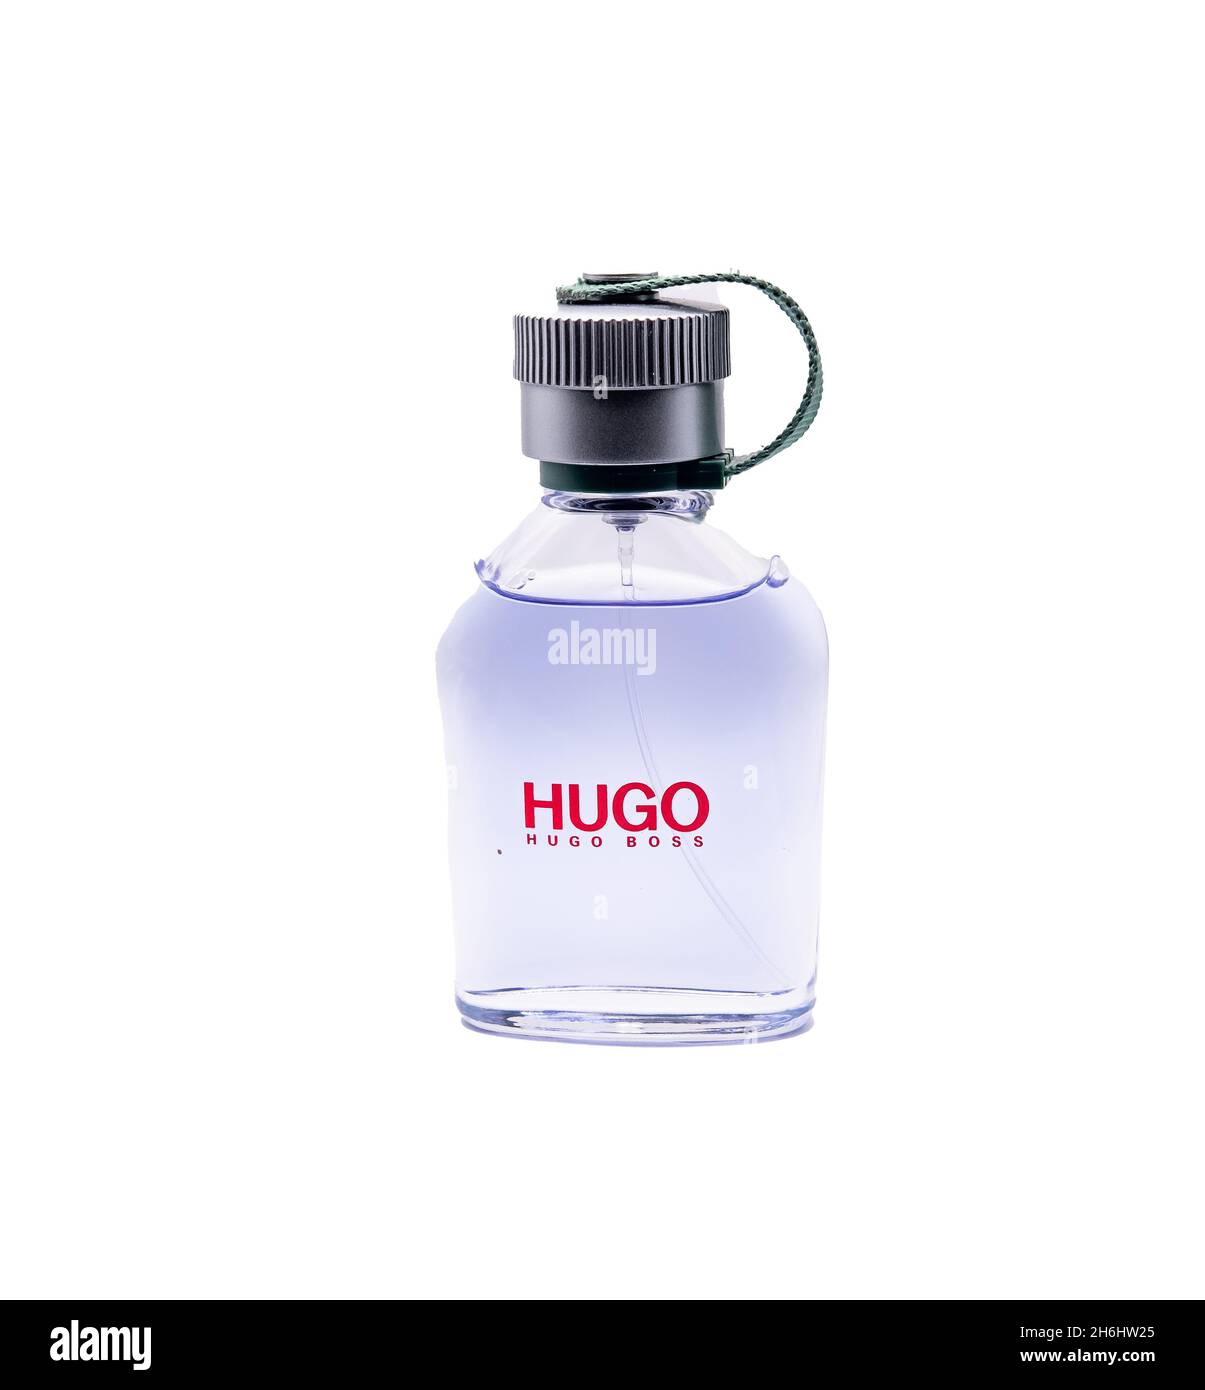 Hugo boss cologne hi-res stock photography and images - Alamy